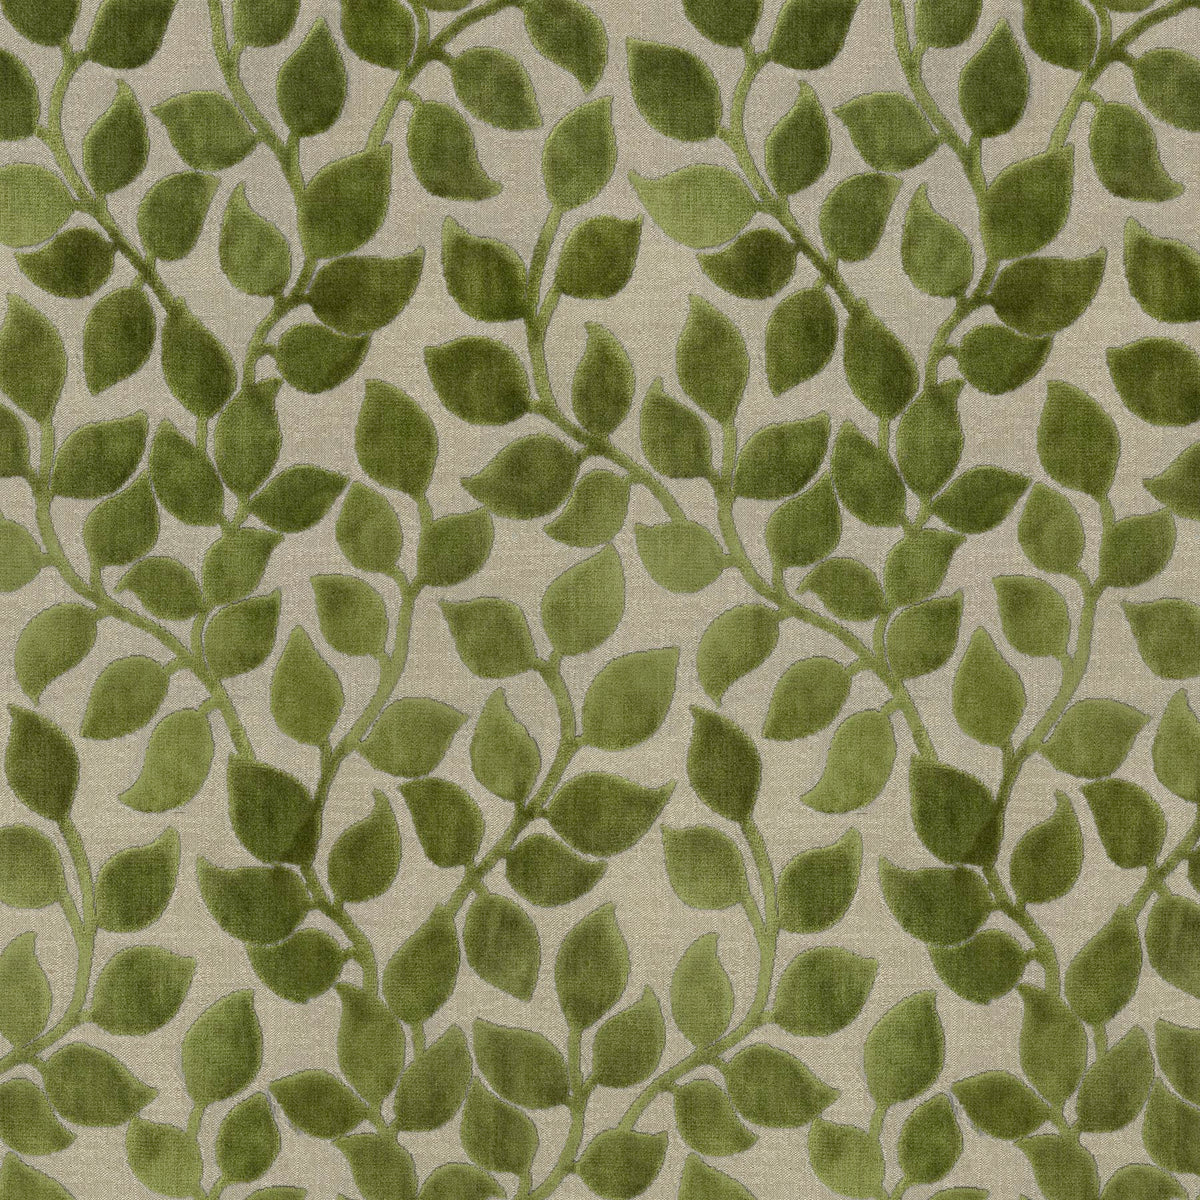 P/K Lifestyles Lovely Leaf - Forest 411262 Fabric Swatch